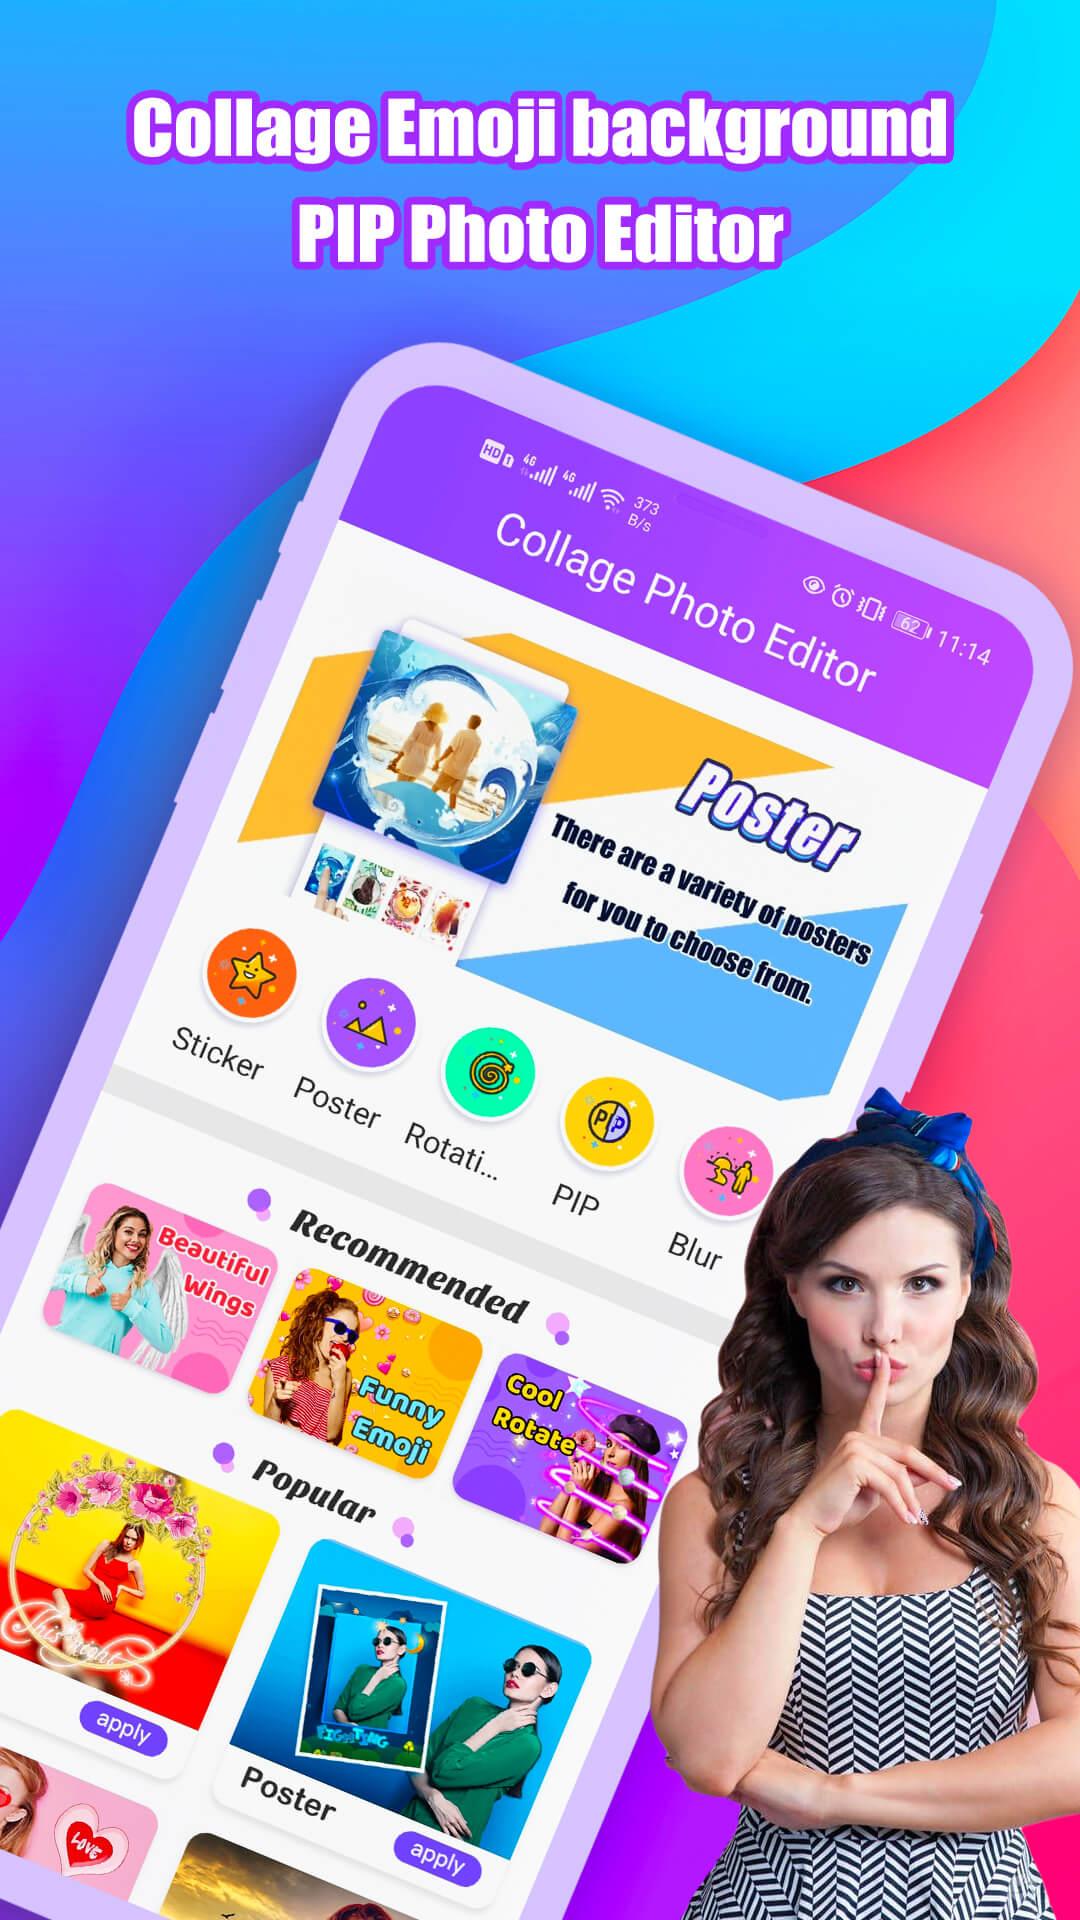 Collage Emoji background PIP Photo Editor APK for Android Download